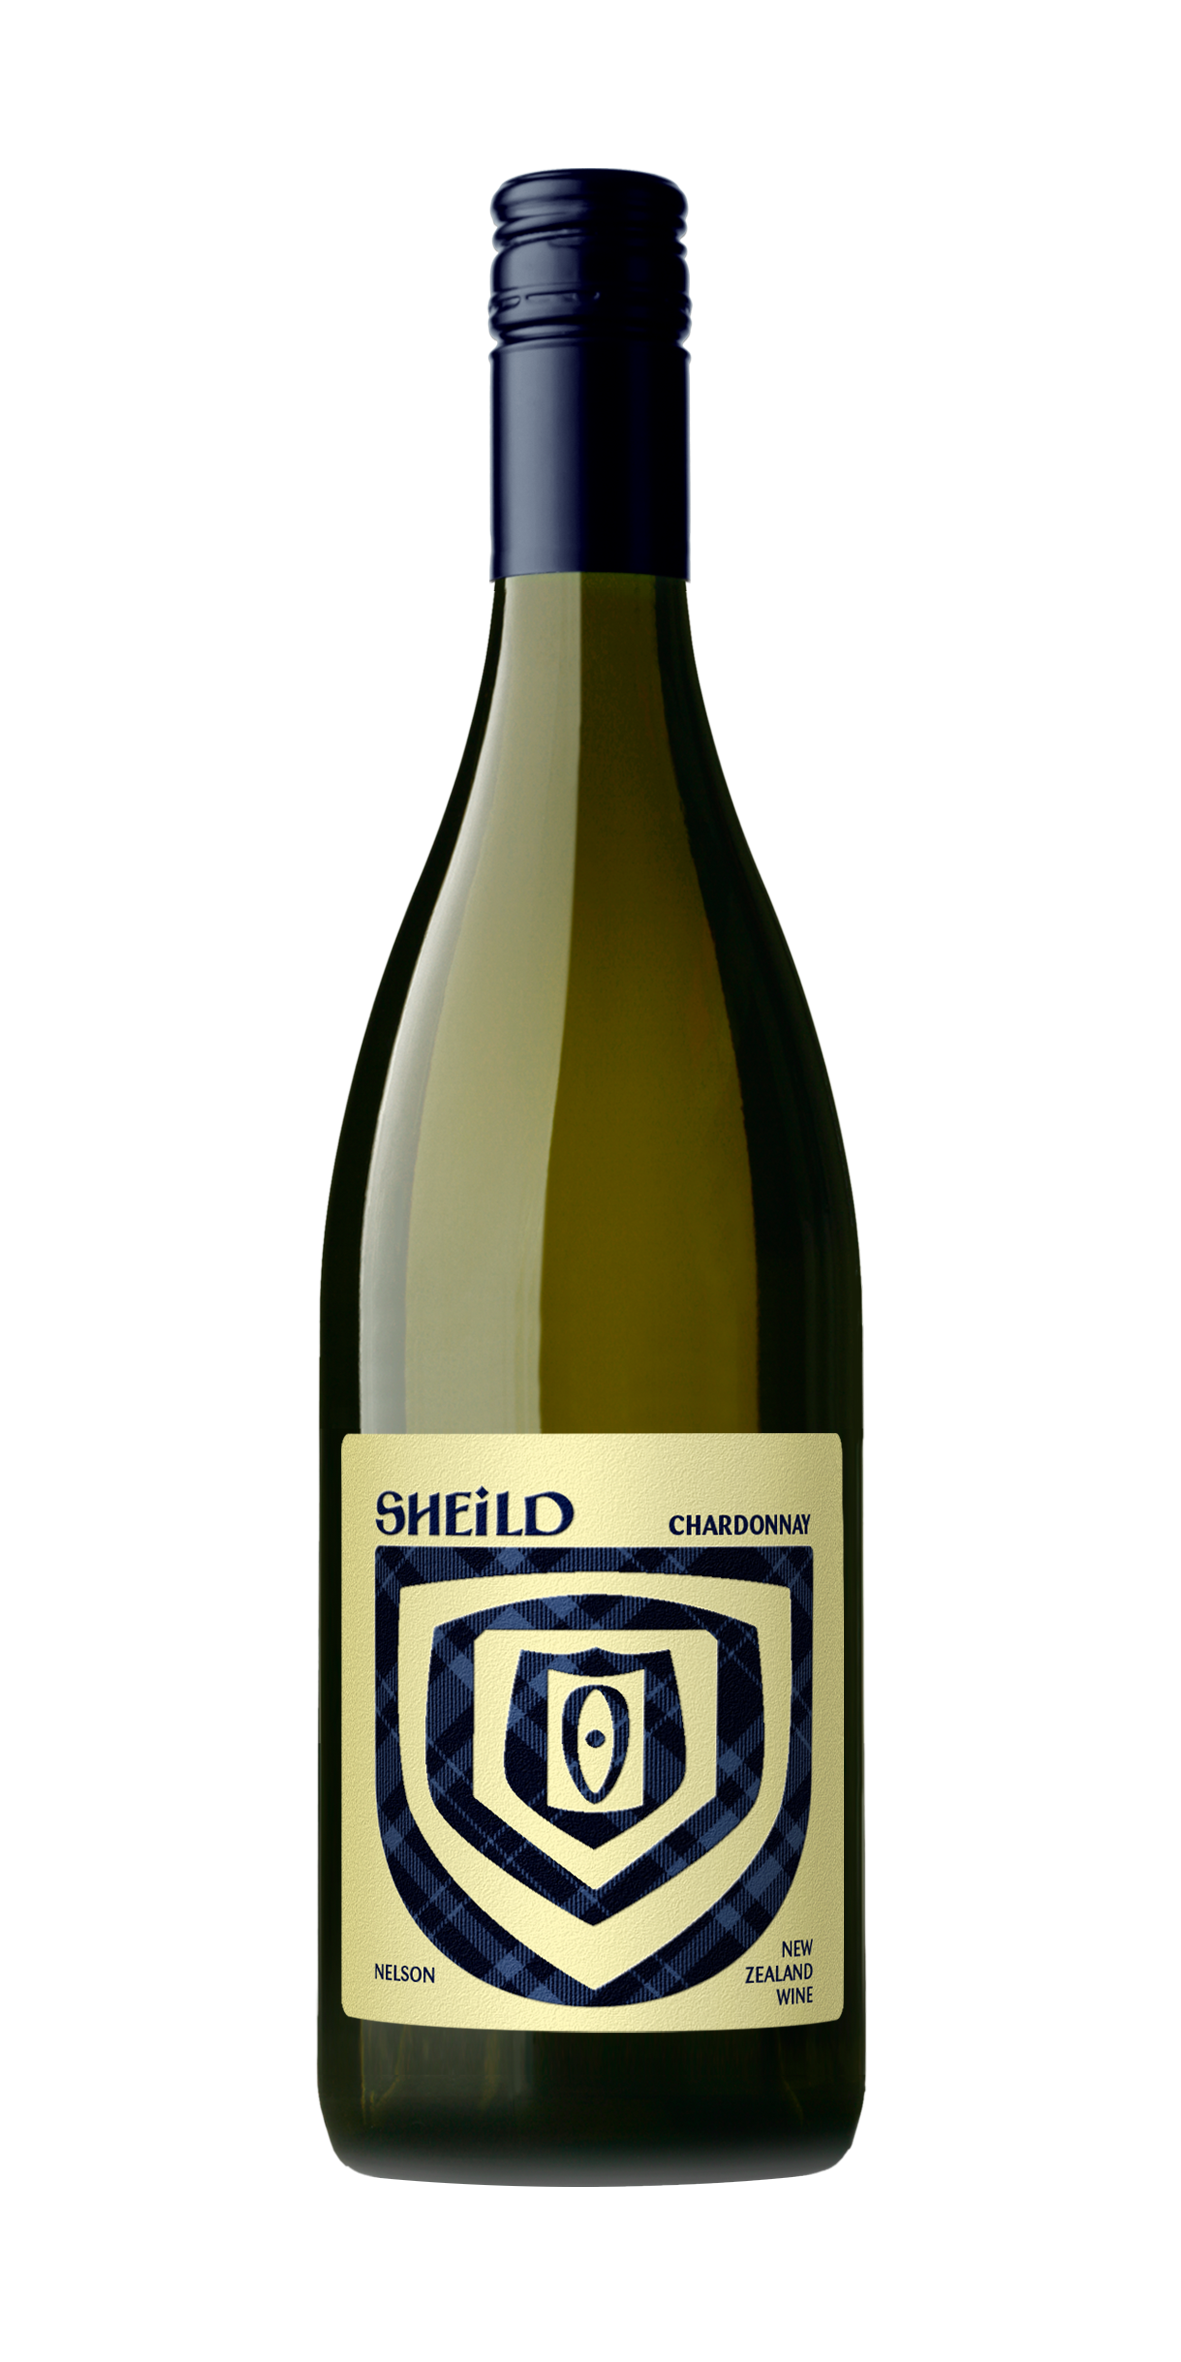 Bottle of SHEiLD's Chardonnay wine, with yellow label and dark blue cap/logo.